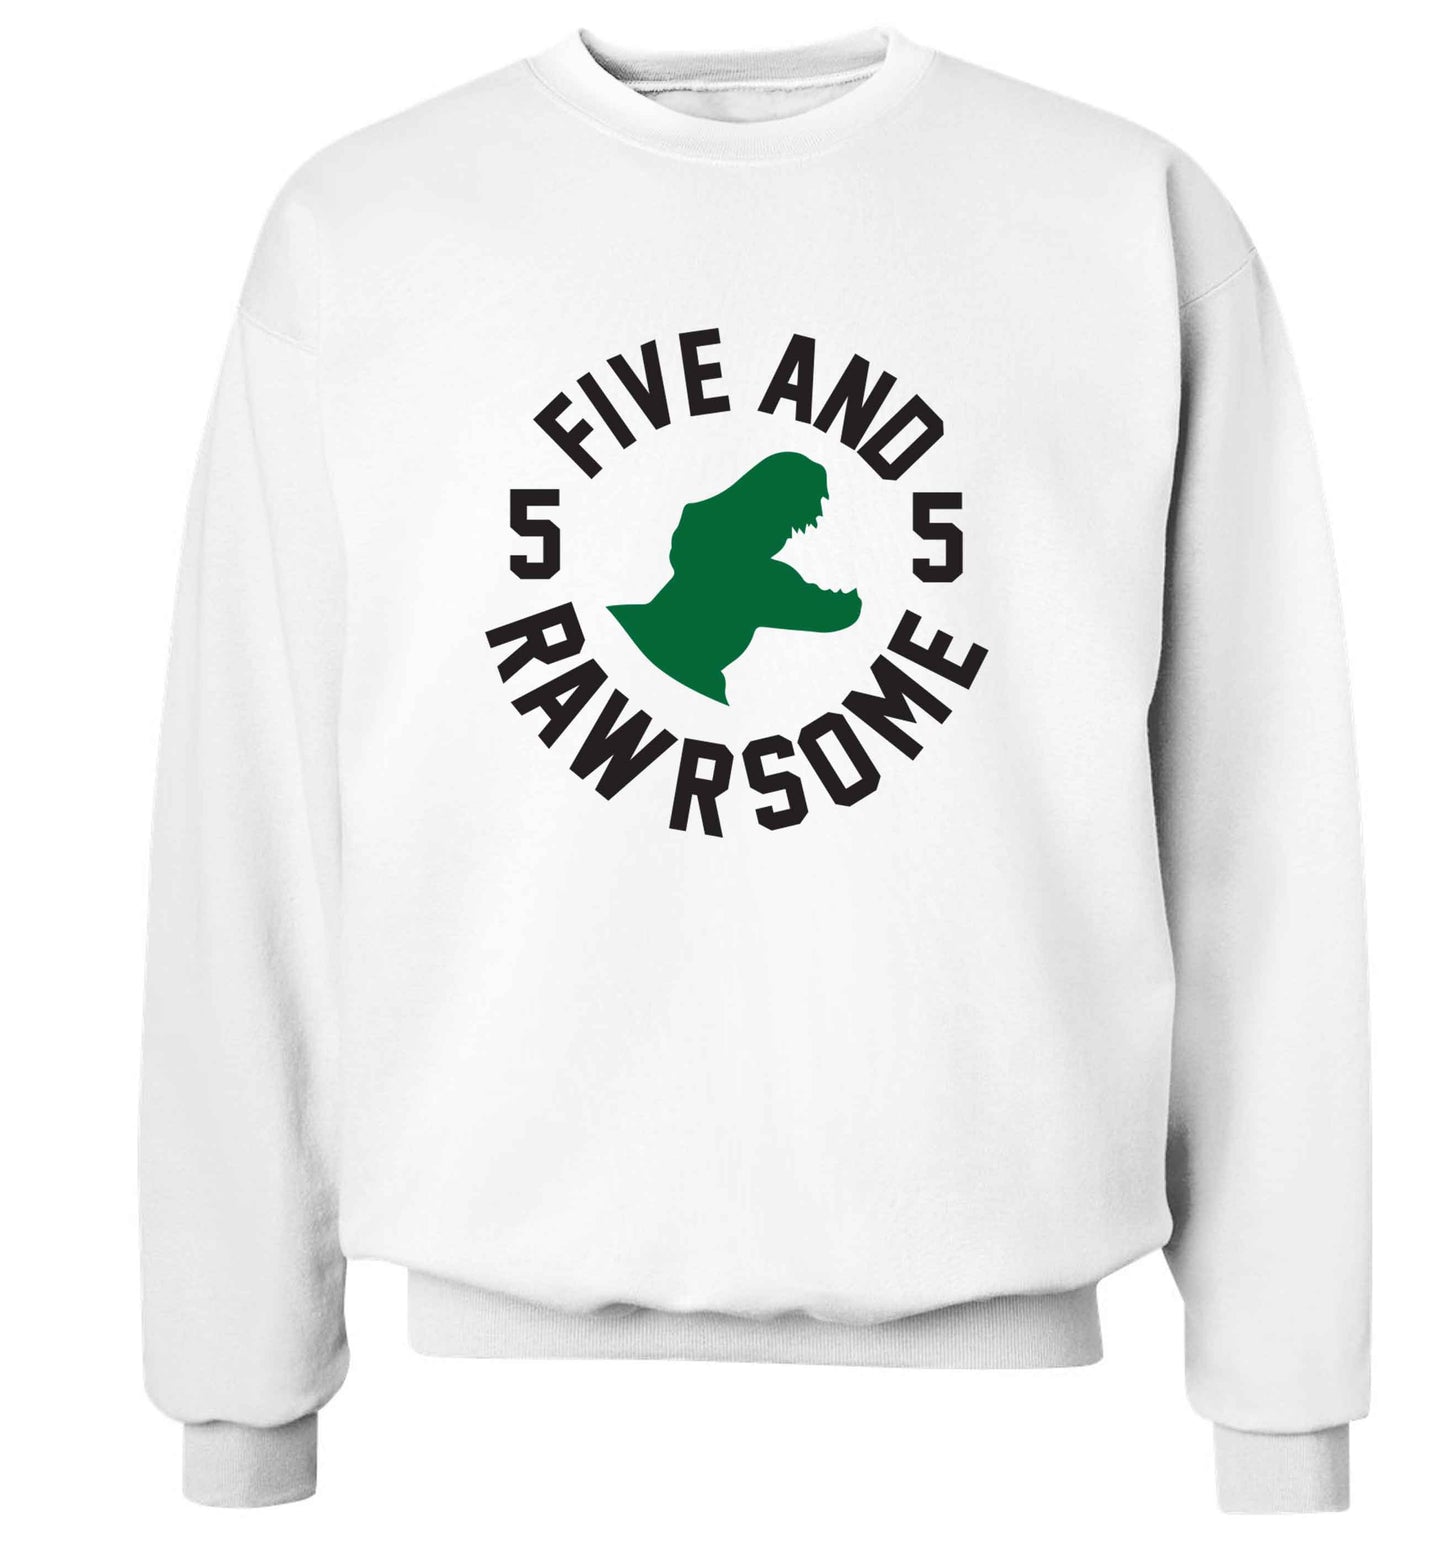 Five and rawrsome adult's unisex white sweater 2XL